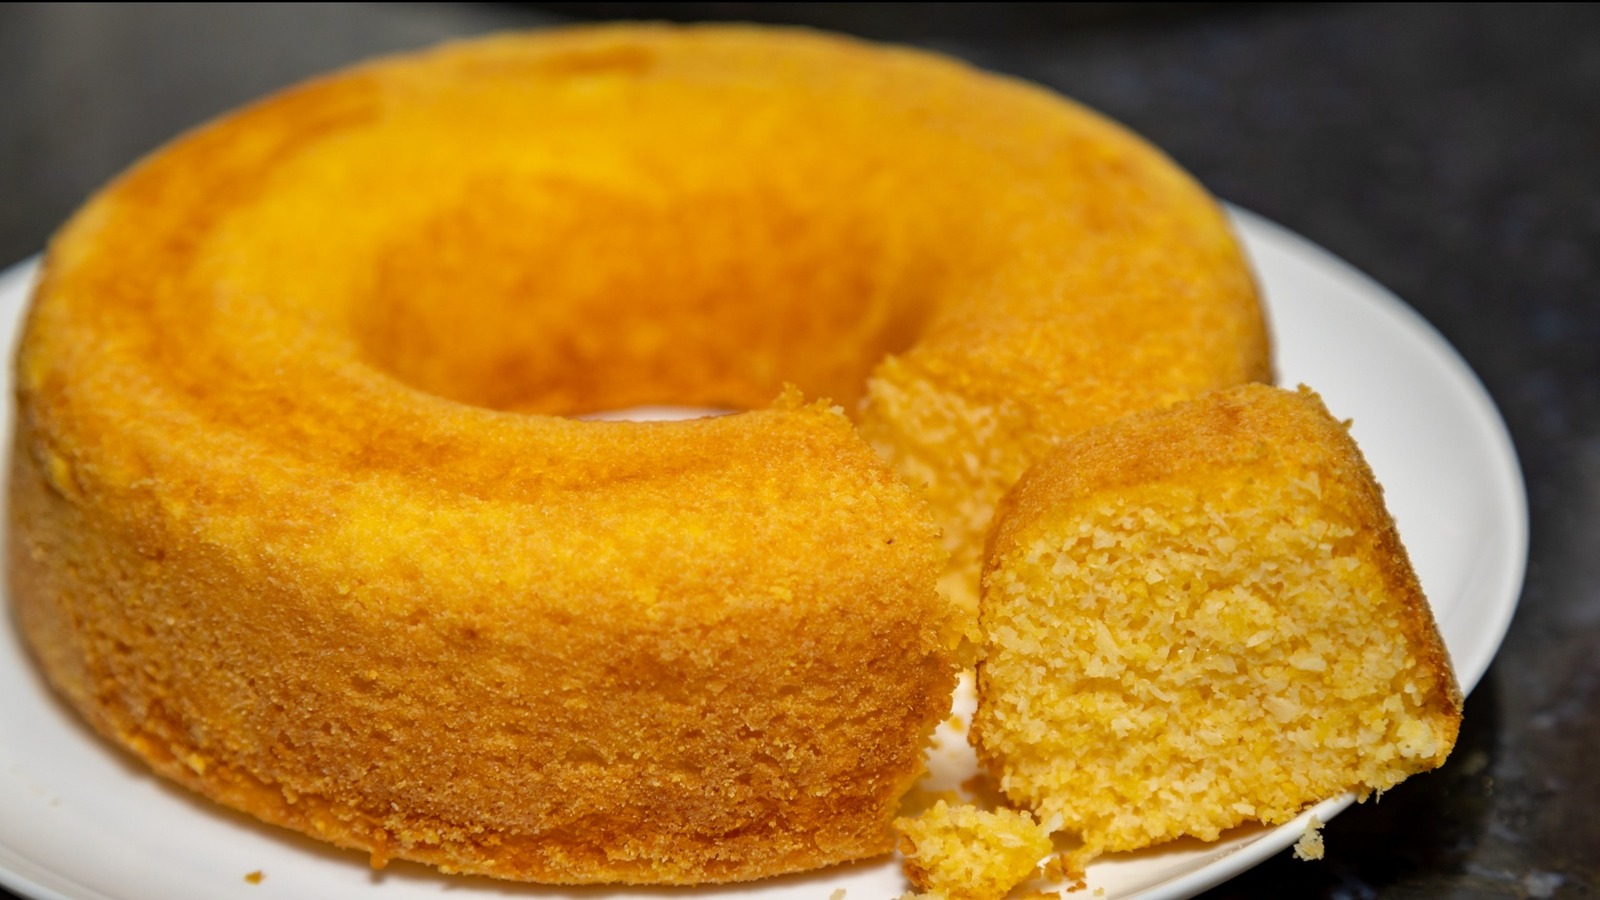 https://www.foodrepublic.com/img/gallery/the-can-hack-that-turns-a-cake-pan-into-a-bundt-pan/l-intro-1696356052.jpg